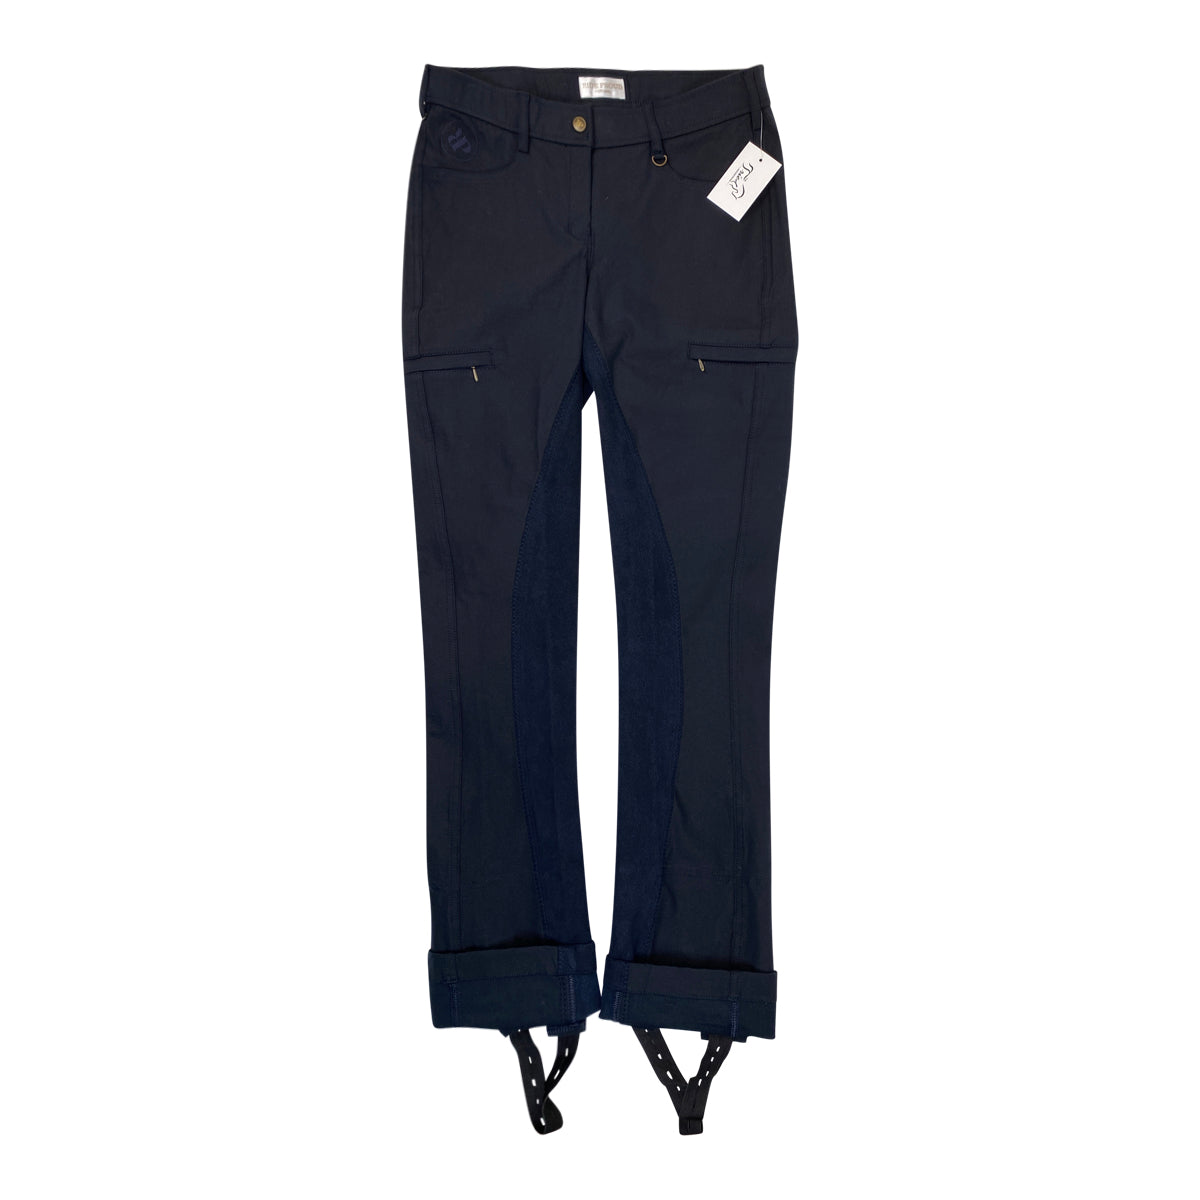 Ride Proud 'Trainers' Full Seat Trail Breeches in Navy